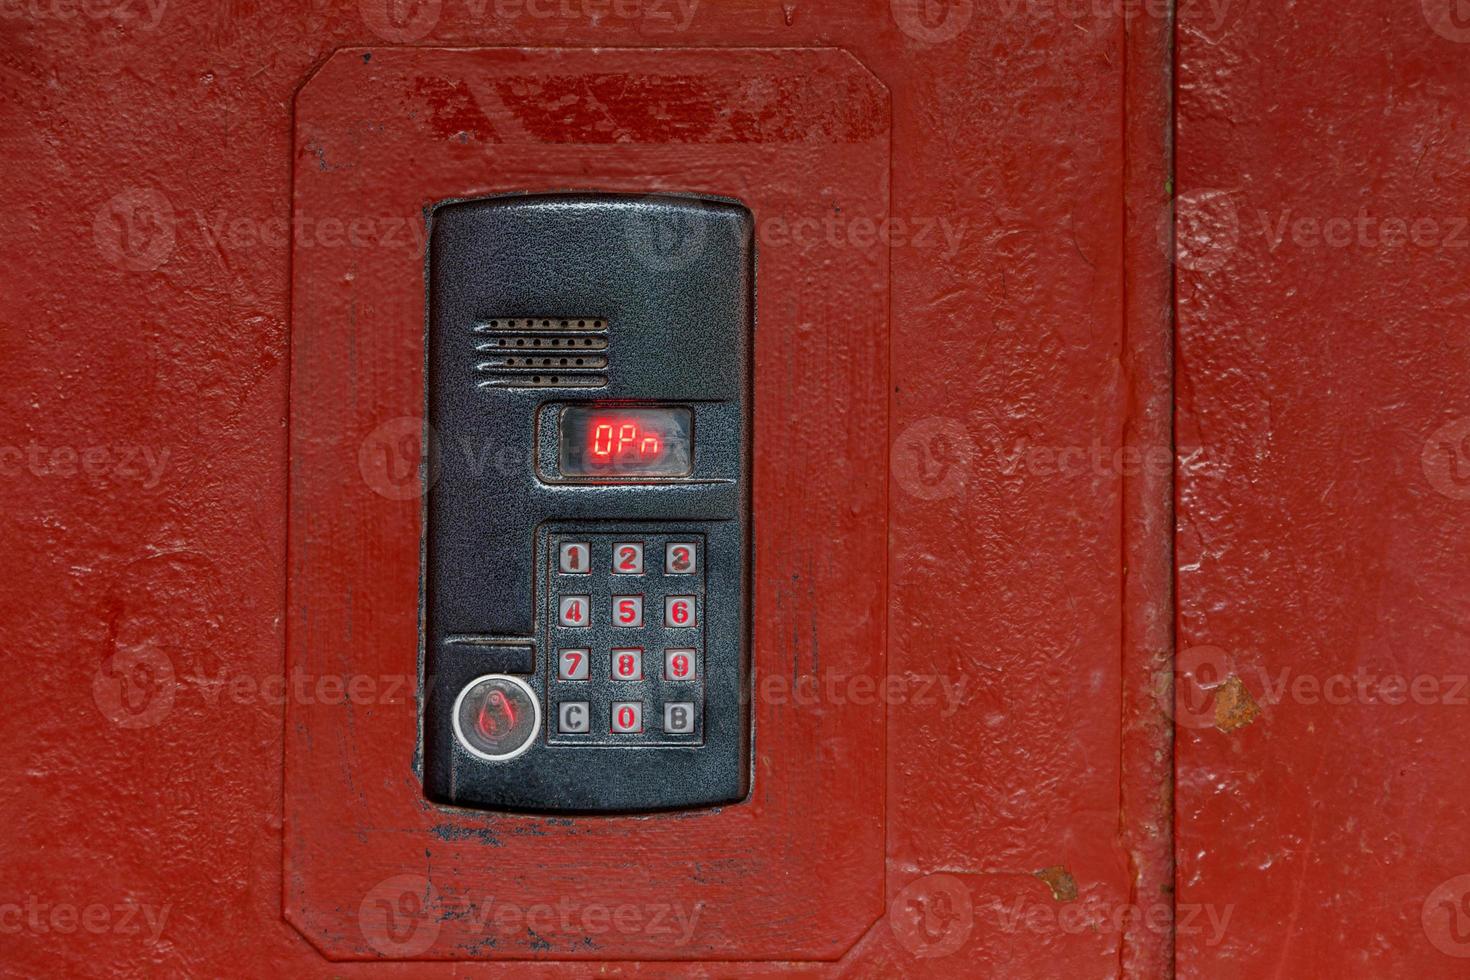 An intercom on old painted red steel surface with a keypad, digital display and rfid sensor for calling close-up photo